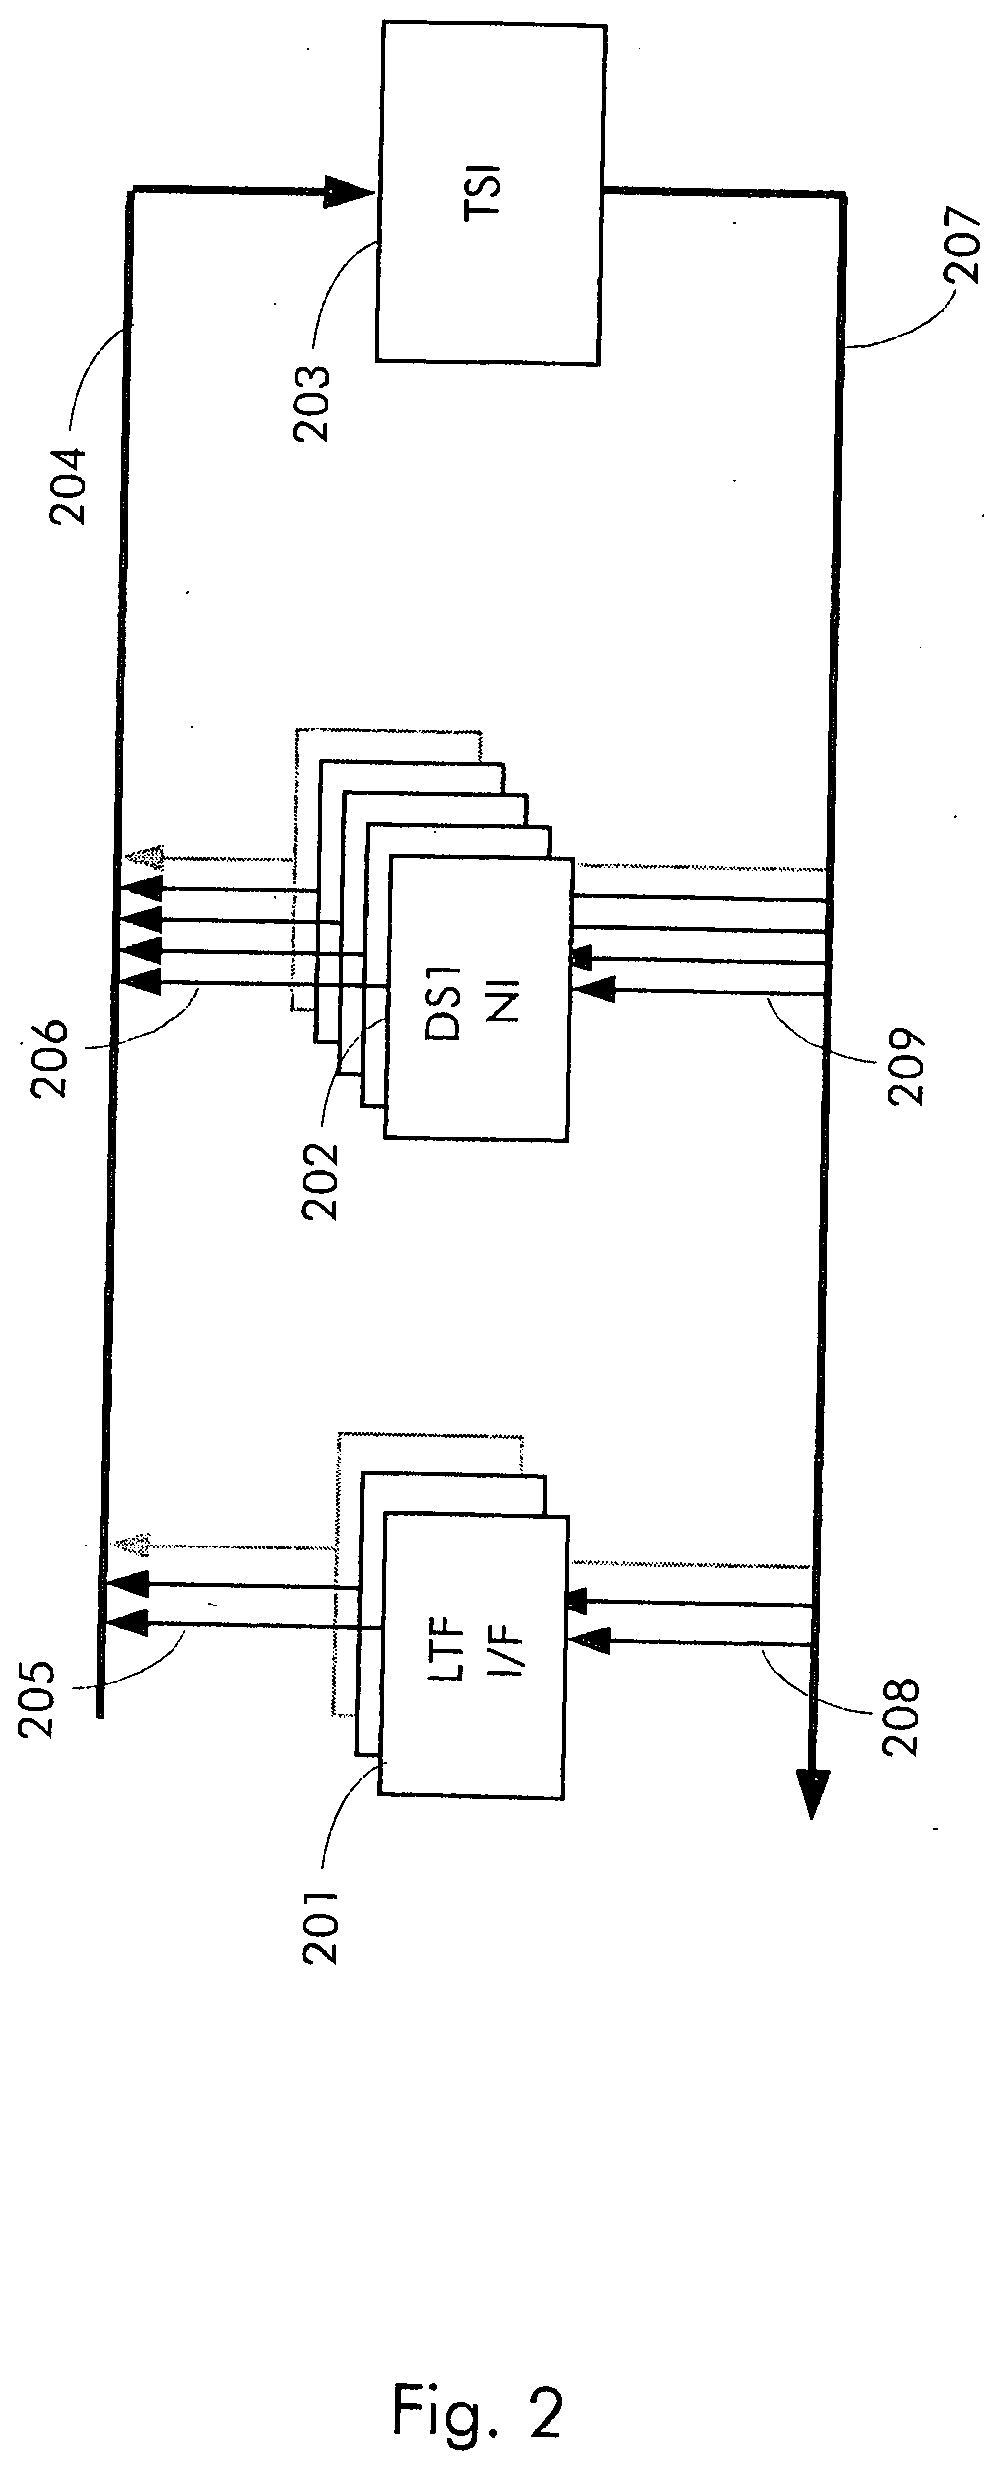 Method and system for combining a conversion between time-division multiplexed digital signals and packetized digital signals with a switching system interface